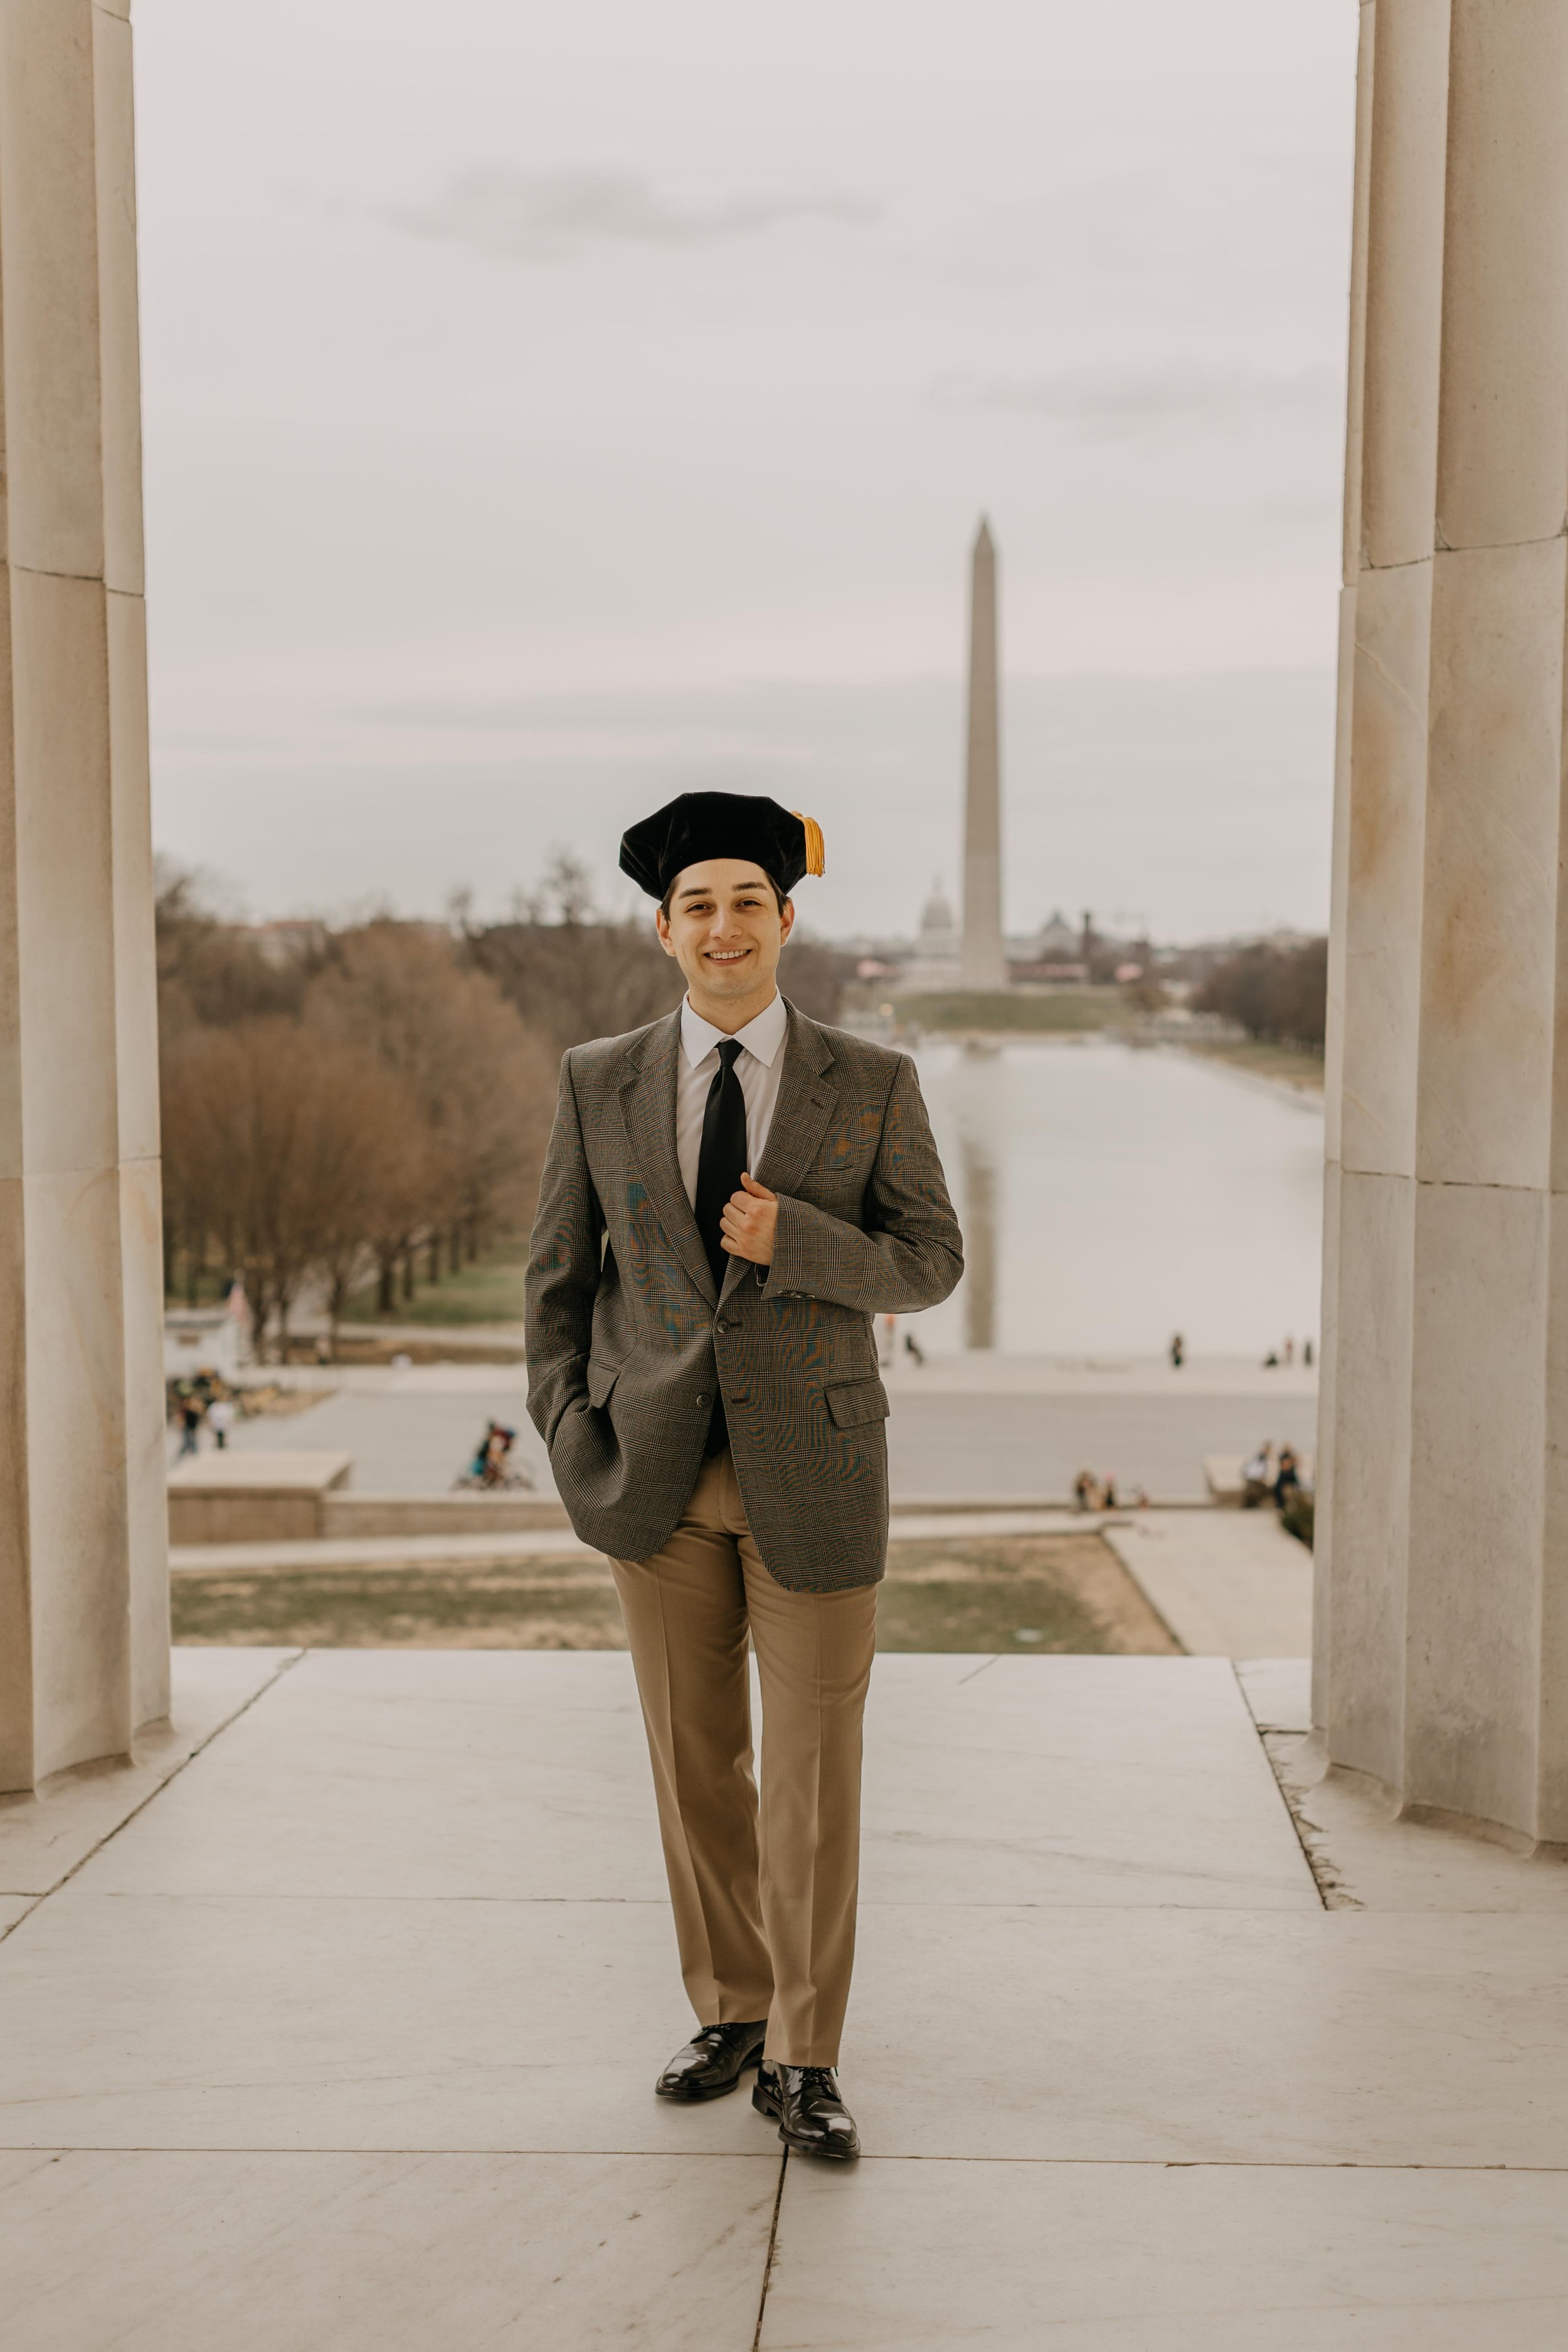 A law student's senior graduation photos at the Lincoln Memorial in Washington DC